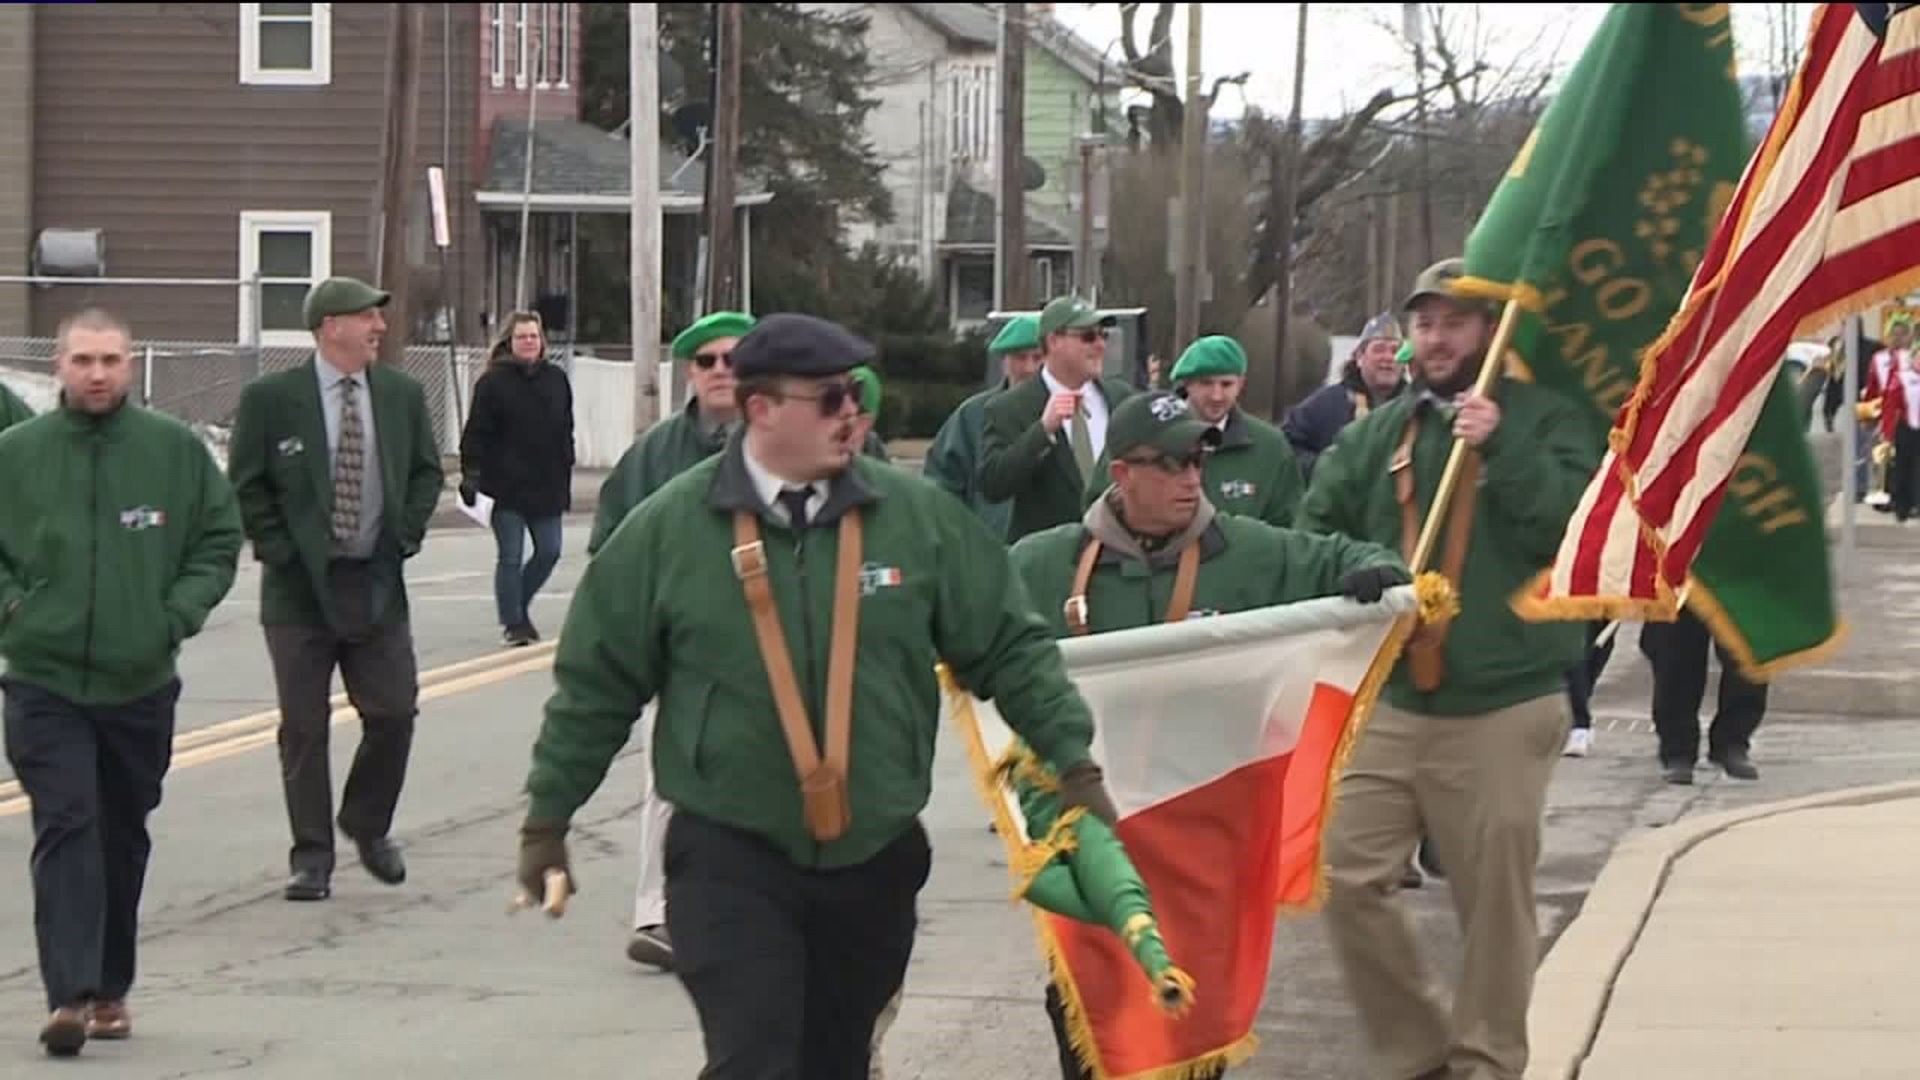 St. Patrick`s Parade in Freeland